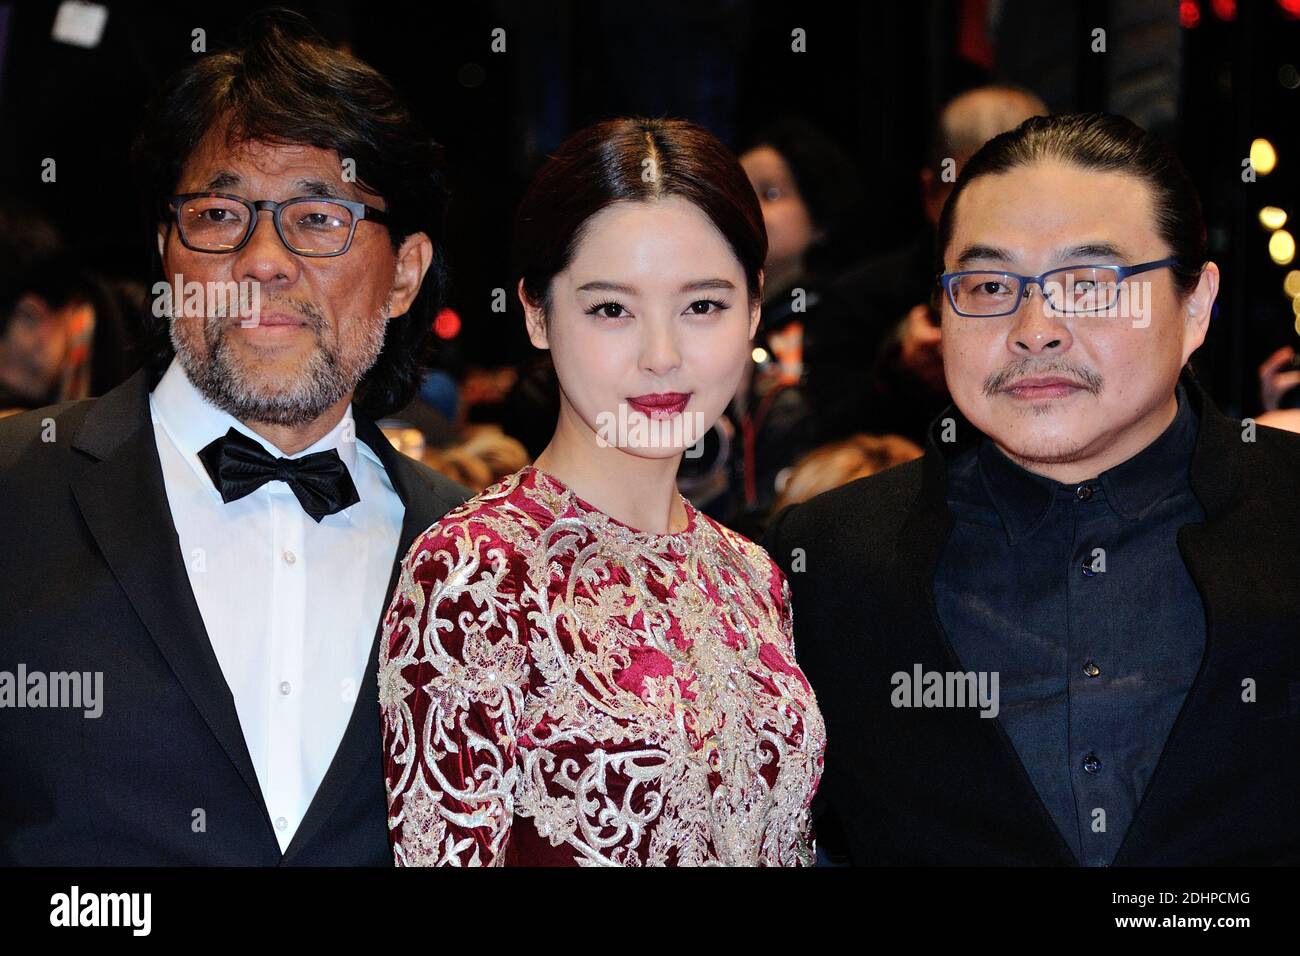 Mark Lee Ping-Bing (L-cameraman of 'Chang Jiang Tu' awarded Silver Bear for Outstanding Artistic Contribution), Xin Zhi Lei and Director Yang Chao (R) aattending the Red Carpet before the Closing Ceremony during the 66th Berlinale, Berlin International Film Festival in Berlin, Germany on February 20, 2016. Photo by Aurore Marechal/ABACAPRESS.COM Stock Photo